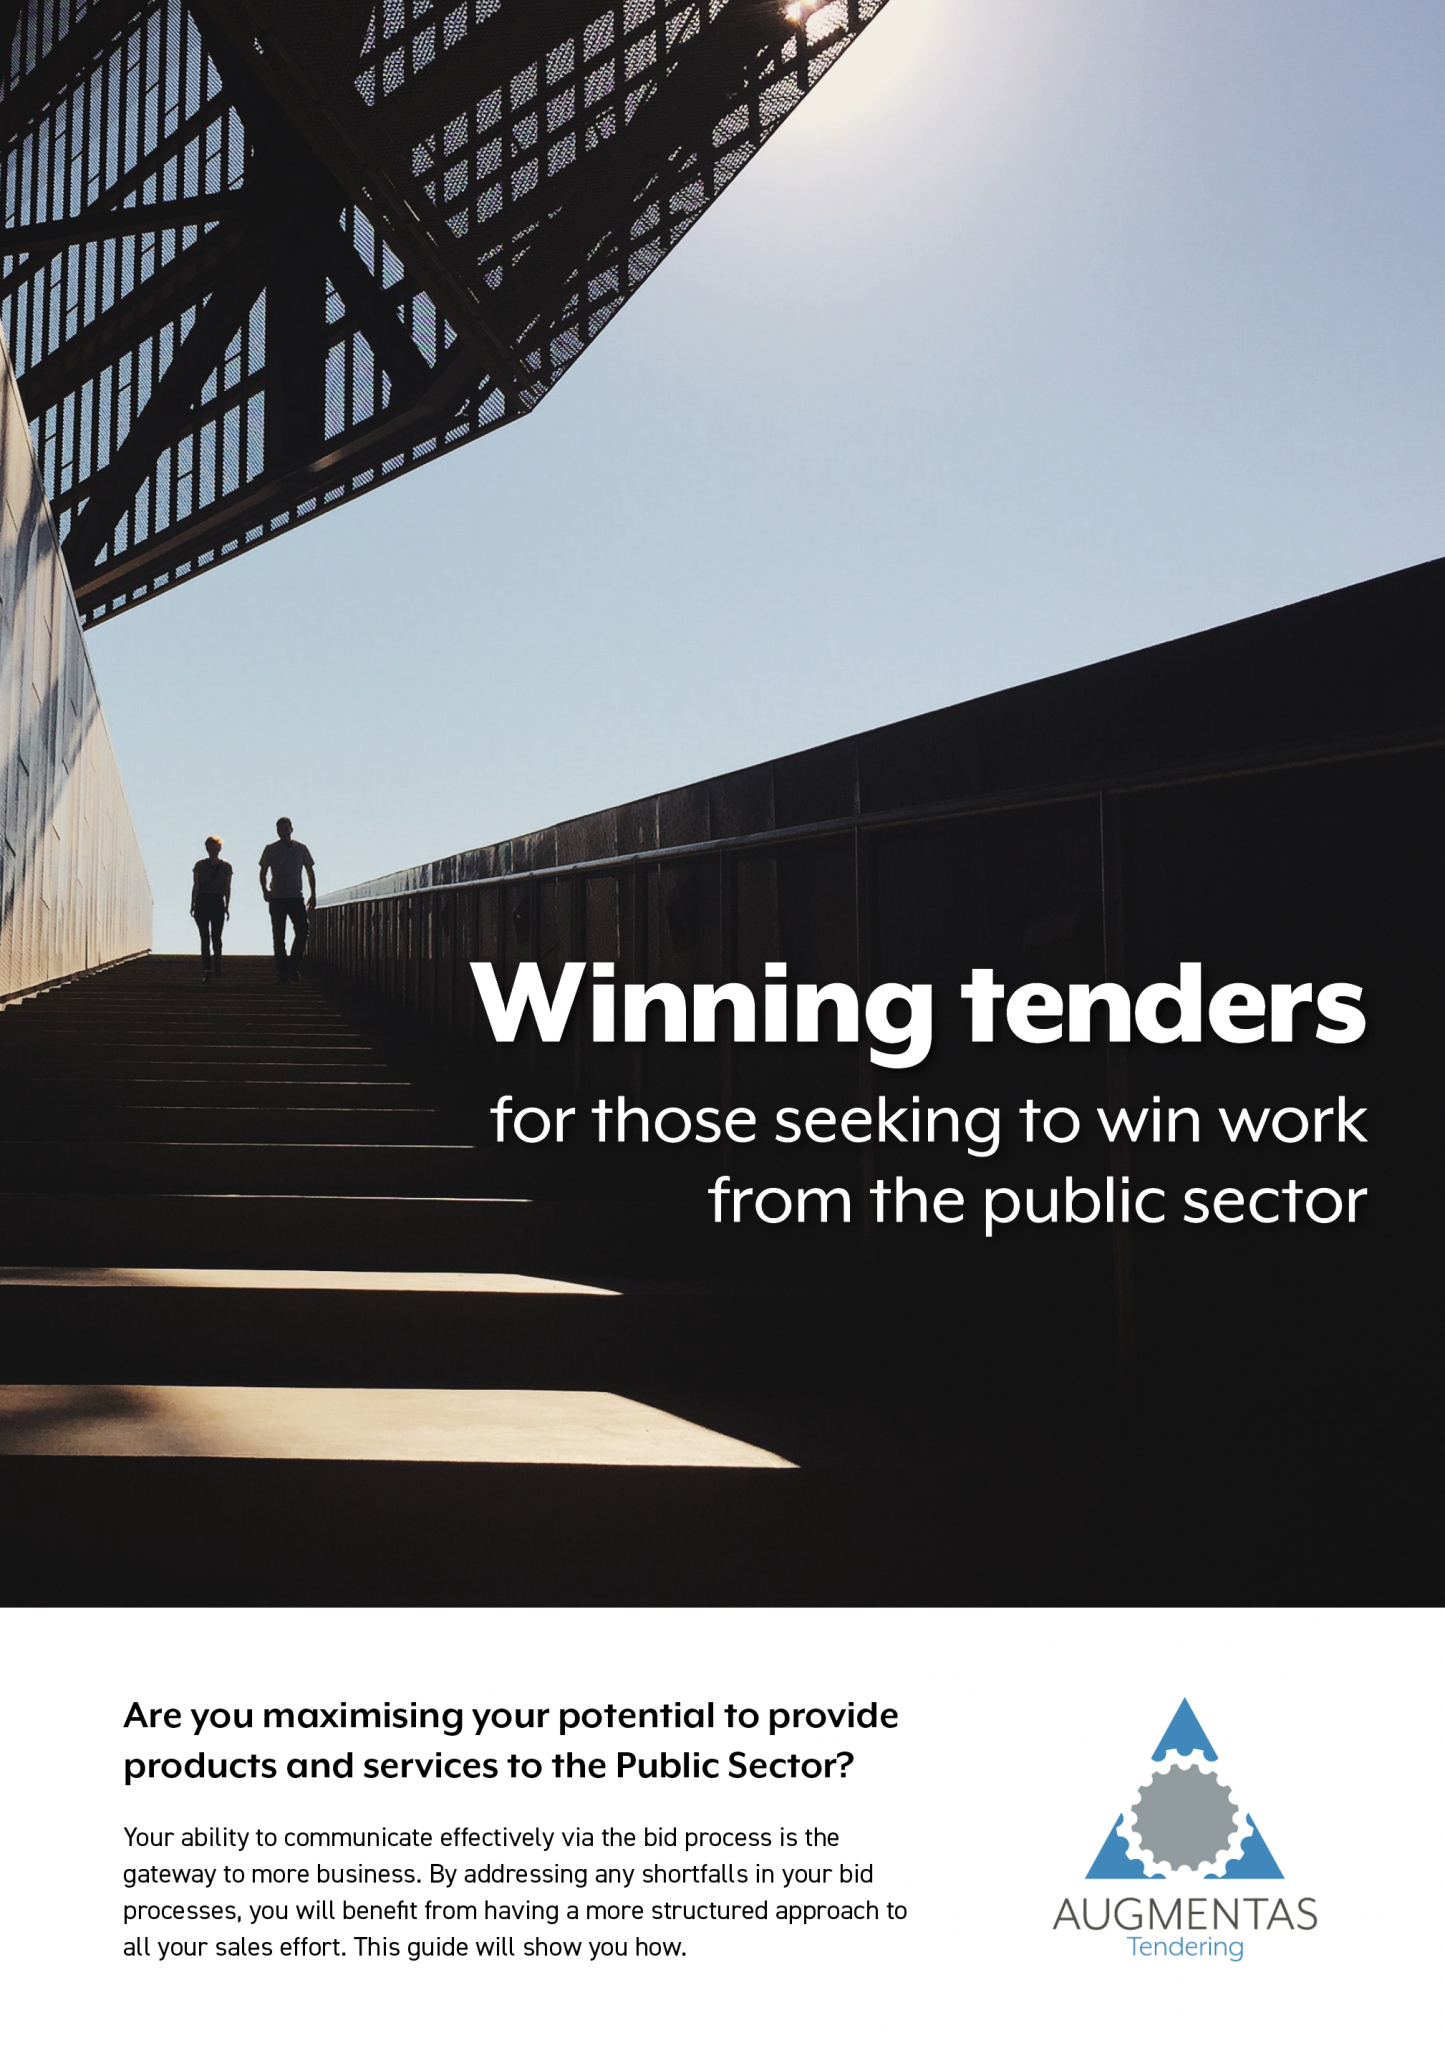 5 Ways You Can Get More Public Tenders While Spending Less